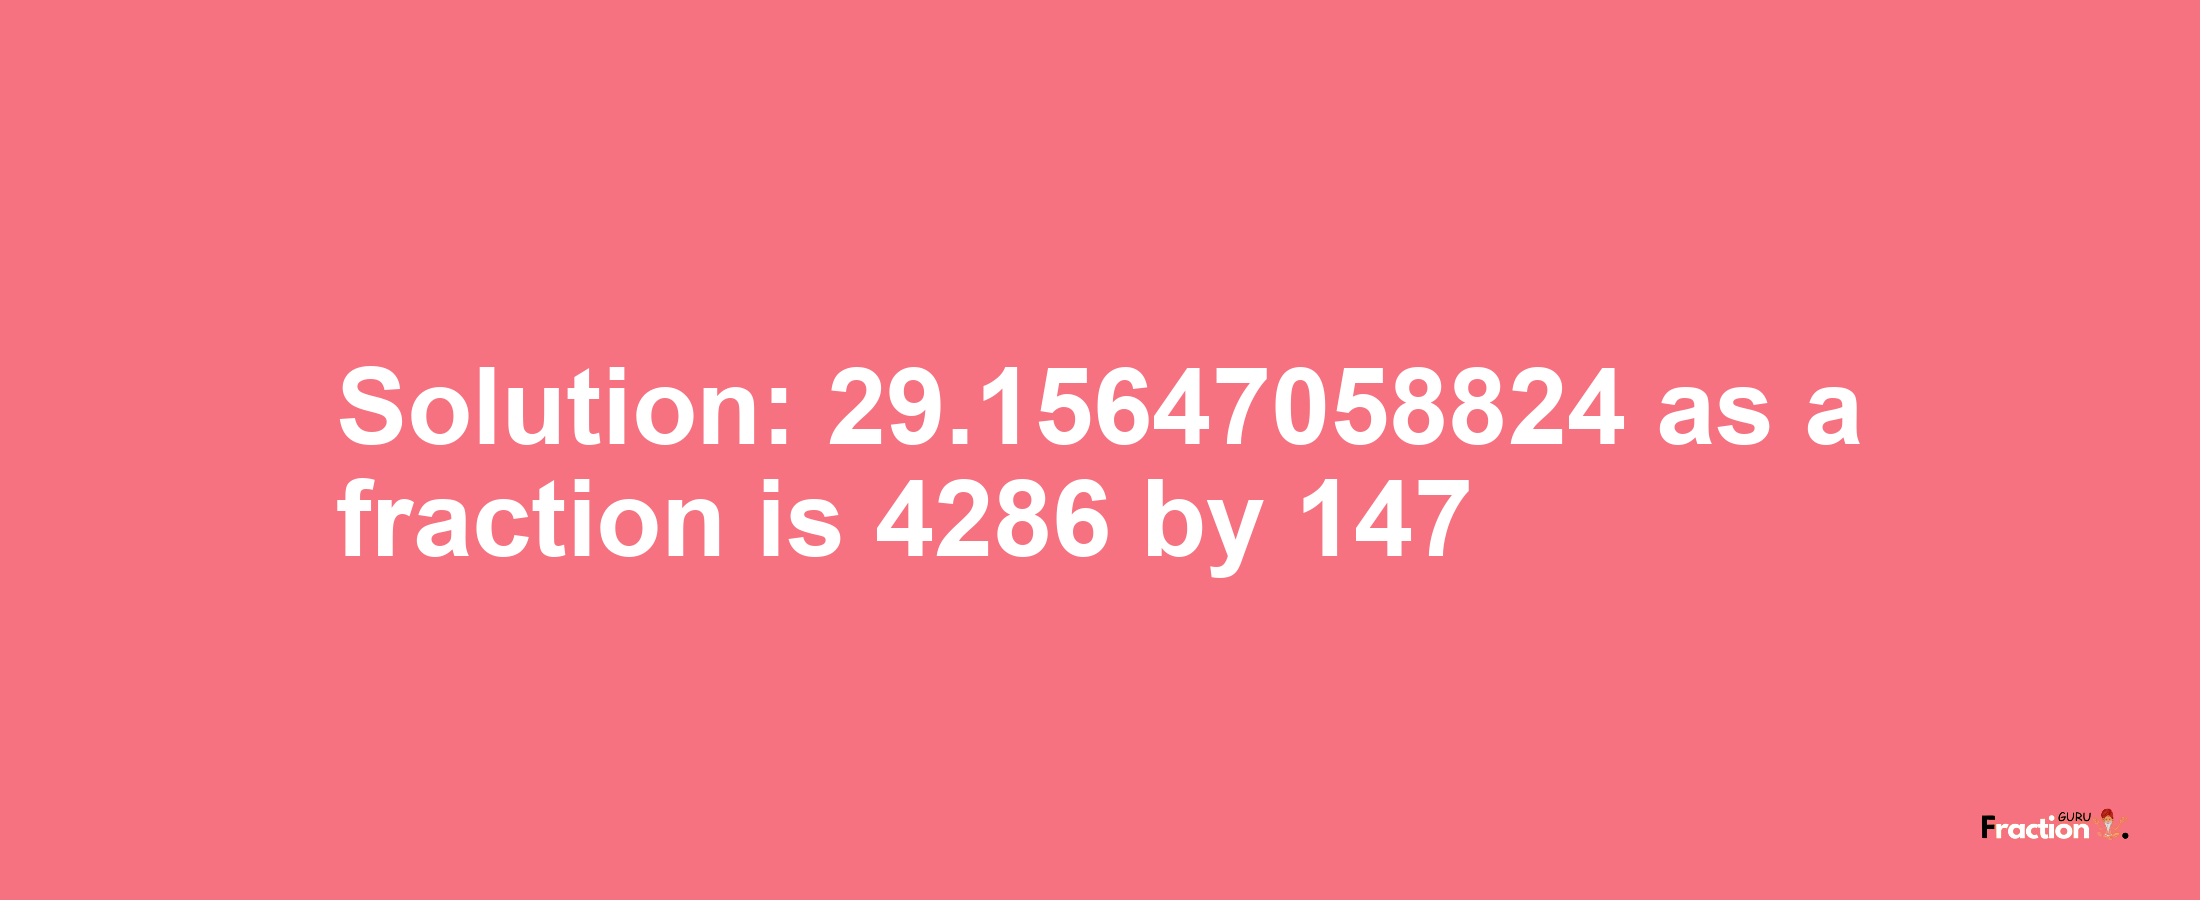 Solution:29.15647058824 as a fraction is 4286/147